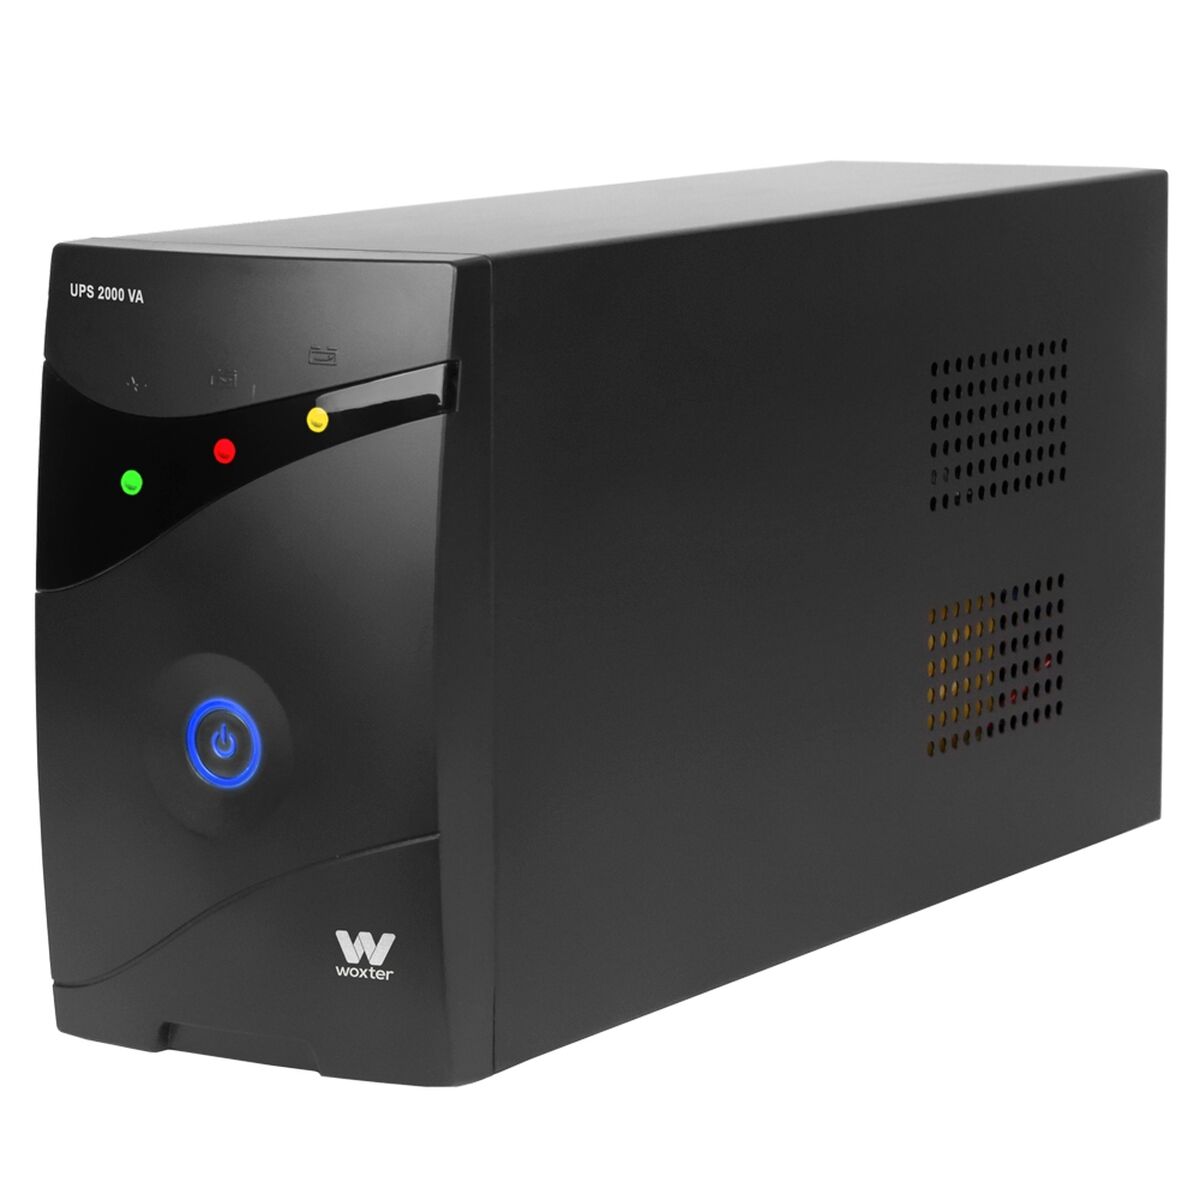 Uninterruptible Power Supply System Interactive UPS Woxter 2000 UPS, Woxter, Computing, Accessories, uninterruptible-power-supply-system-interactive-ups-woxter-2000-ups, Brand_Woxter, category-reference-2609, category-reference-2642, category-reference-2845, category-reference-t-19685, category-reference-t-19908, category-reference-t-21341, computers / peripherals, Condition_NEW, office, Price_100 - 200, Teleworking, RiotNook